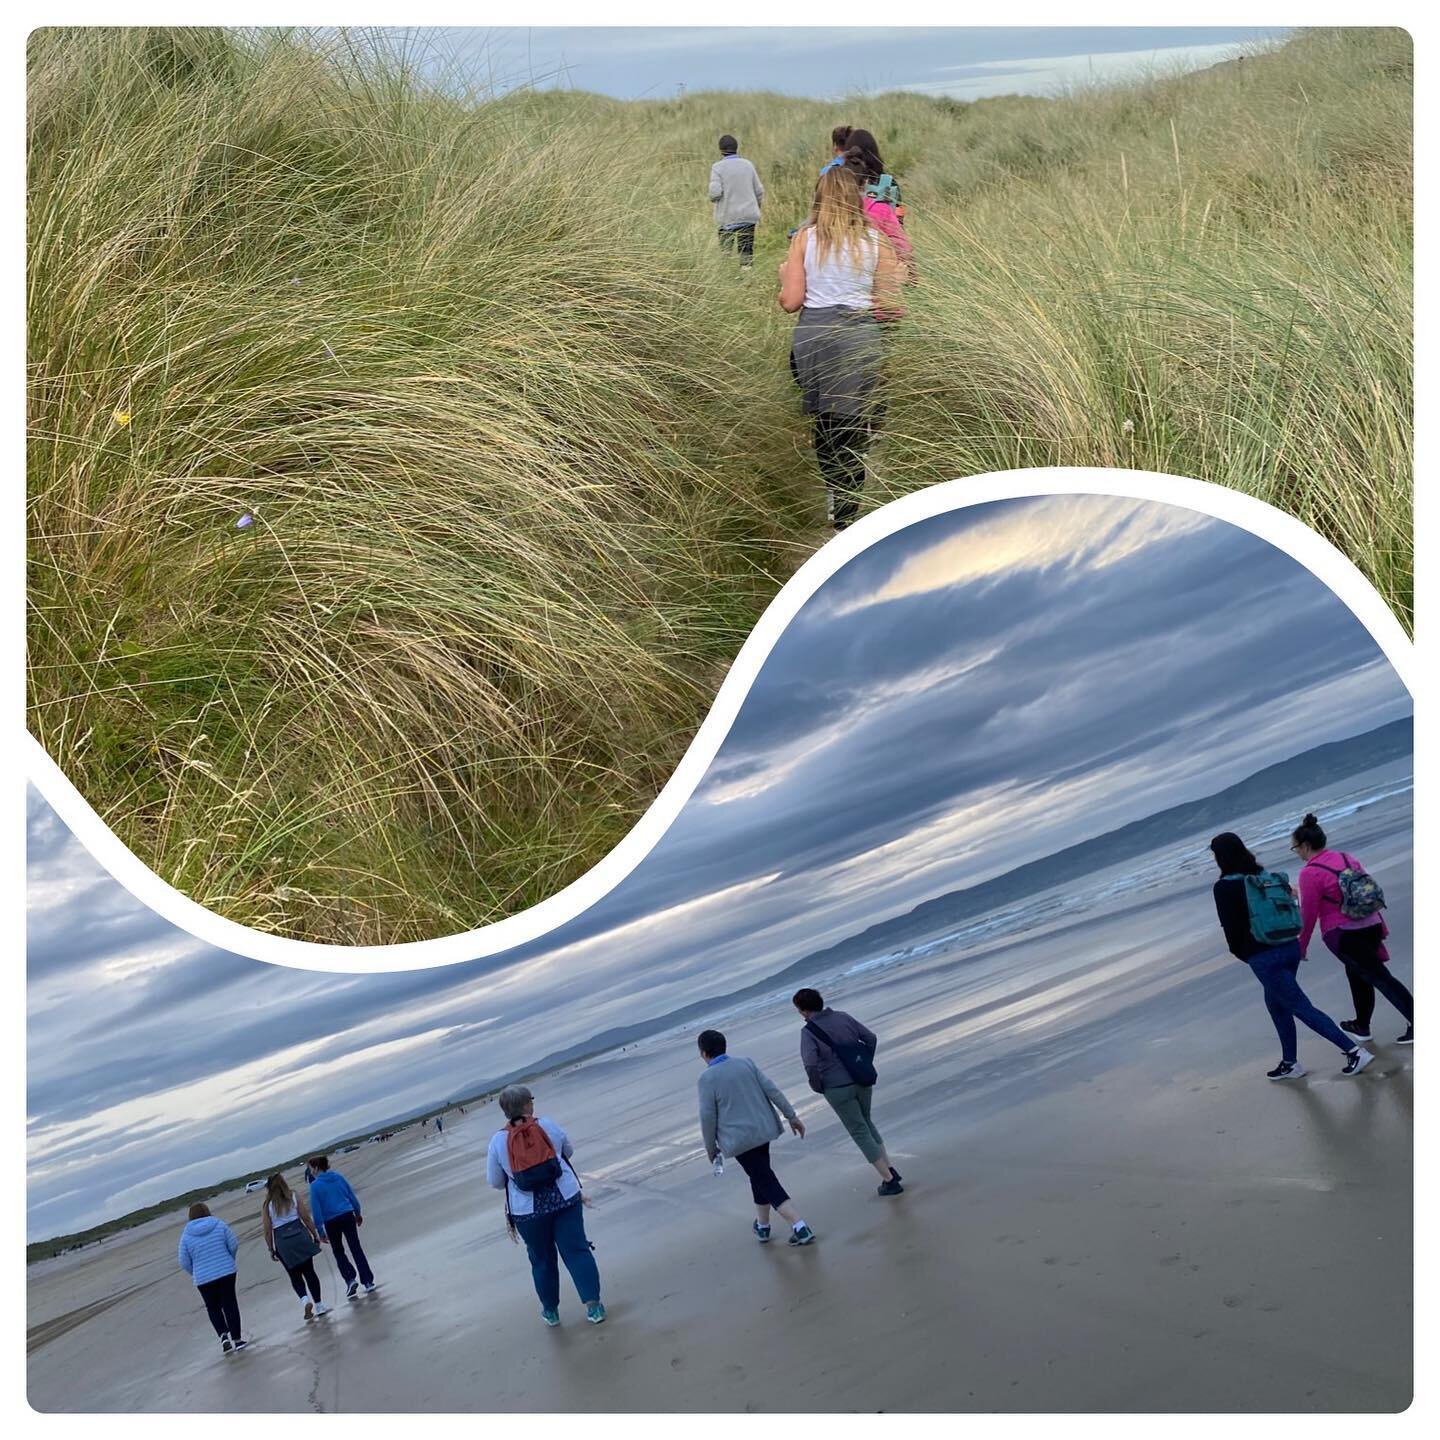 A lovely gathering tonight at Benone for our Zen Walk through the dune grasslands and back along the beach.

A wealth of wildlife to be found in the sand dunes but the swarms of dune flies prompted an early exit to the beach for our meditation, herba